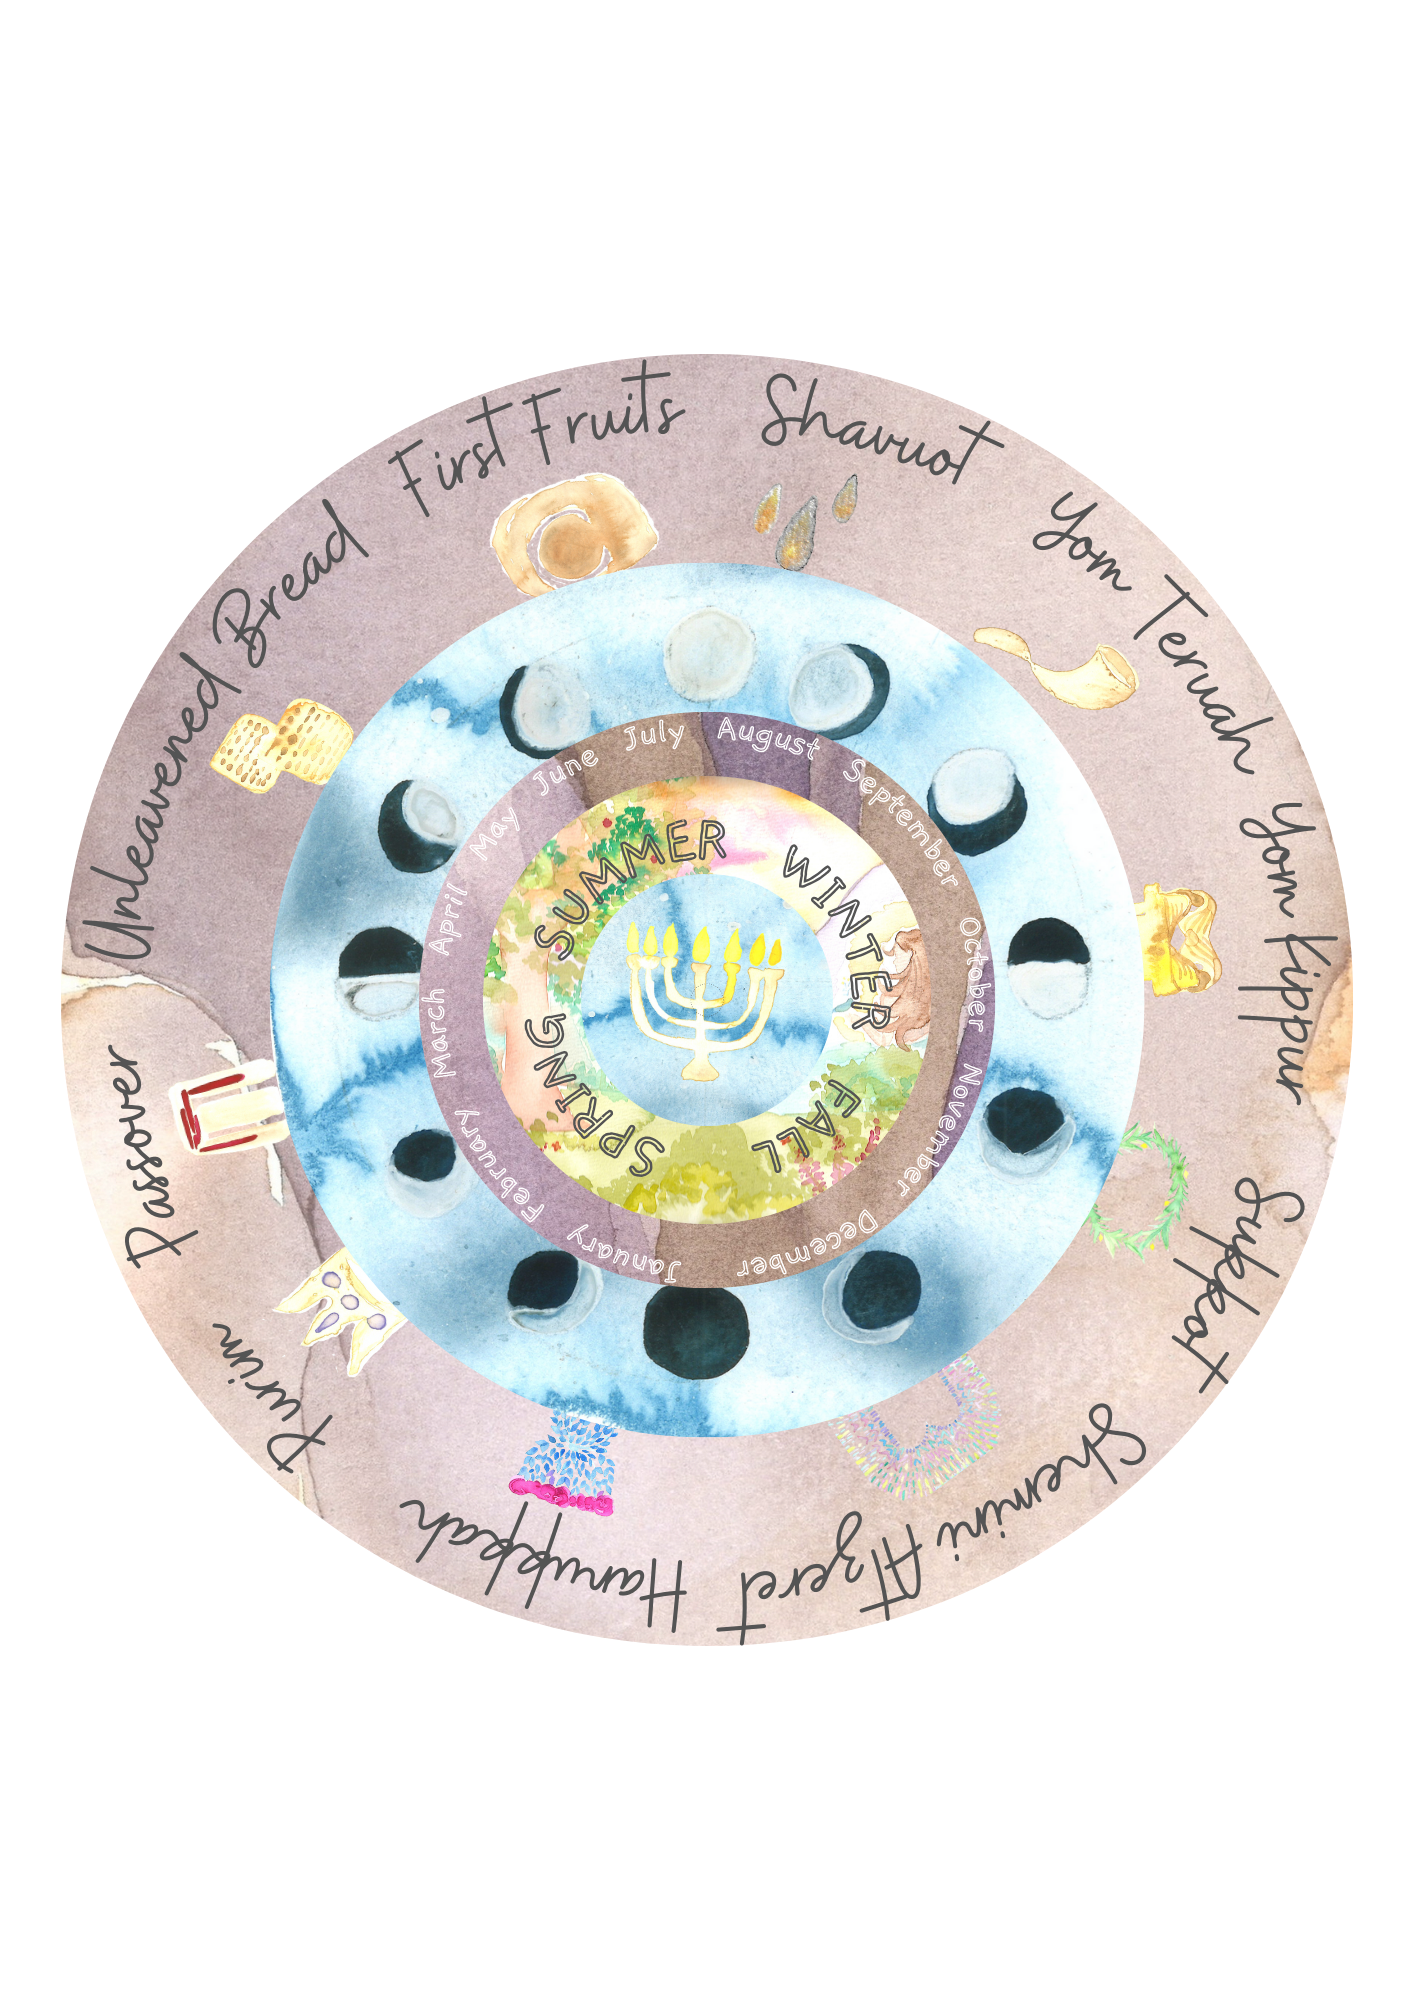 The Biblical Wheel of The Year Craft!